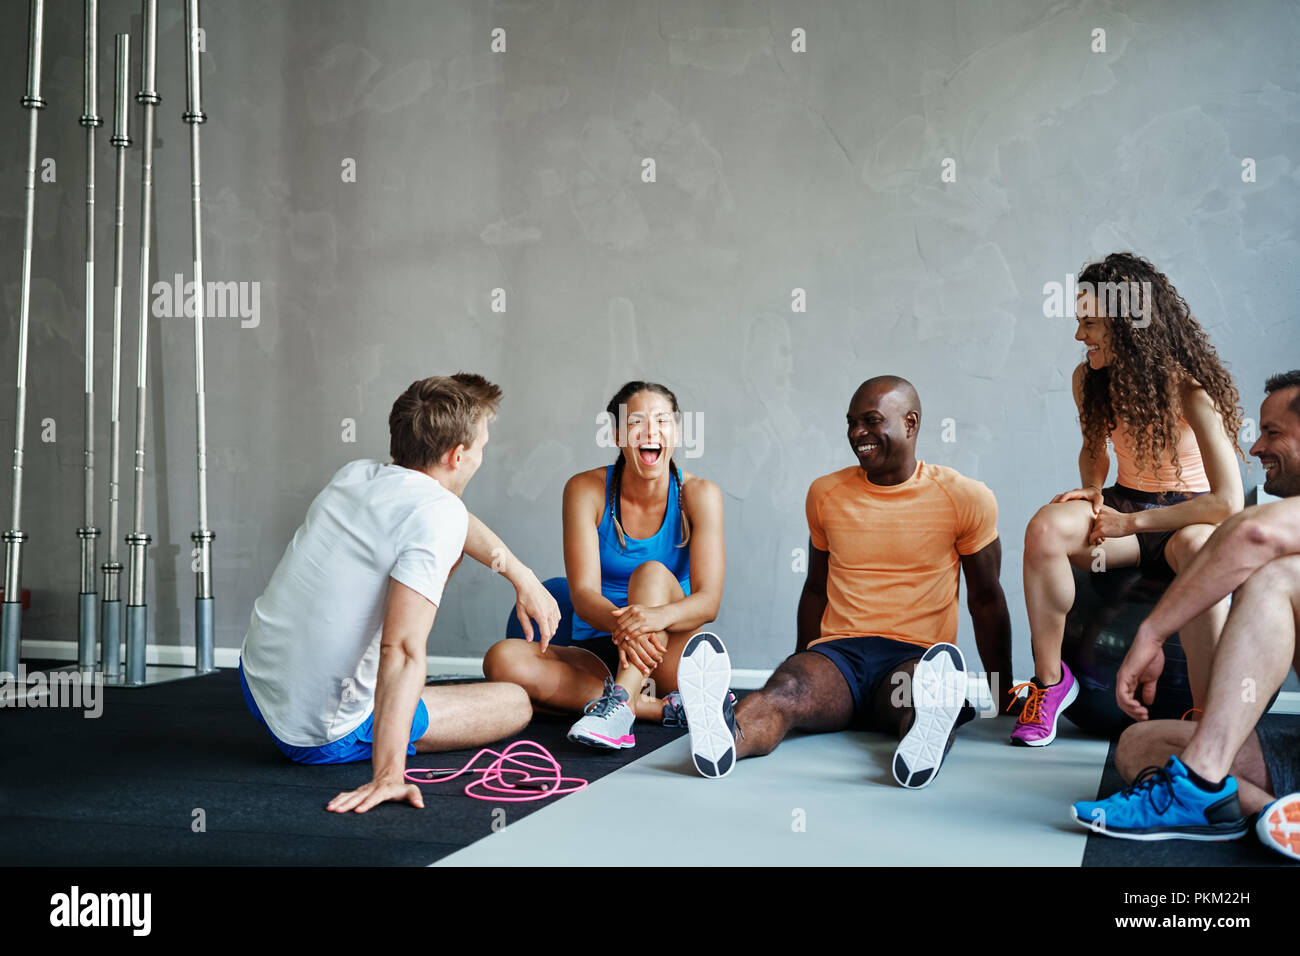 Friends in sportswear talking and laughing together while sitting on the floor of a gym after a workout Stock Photo